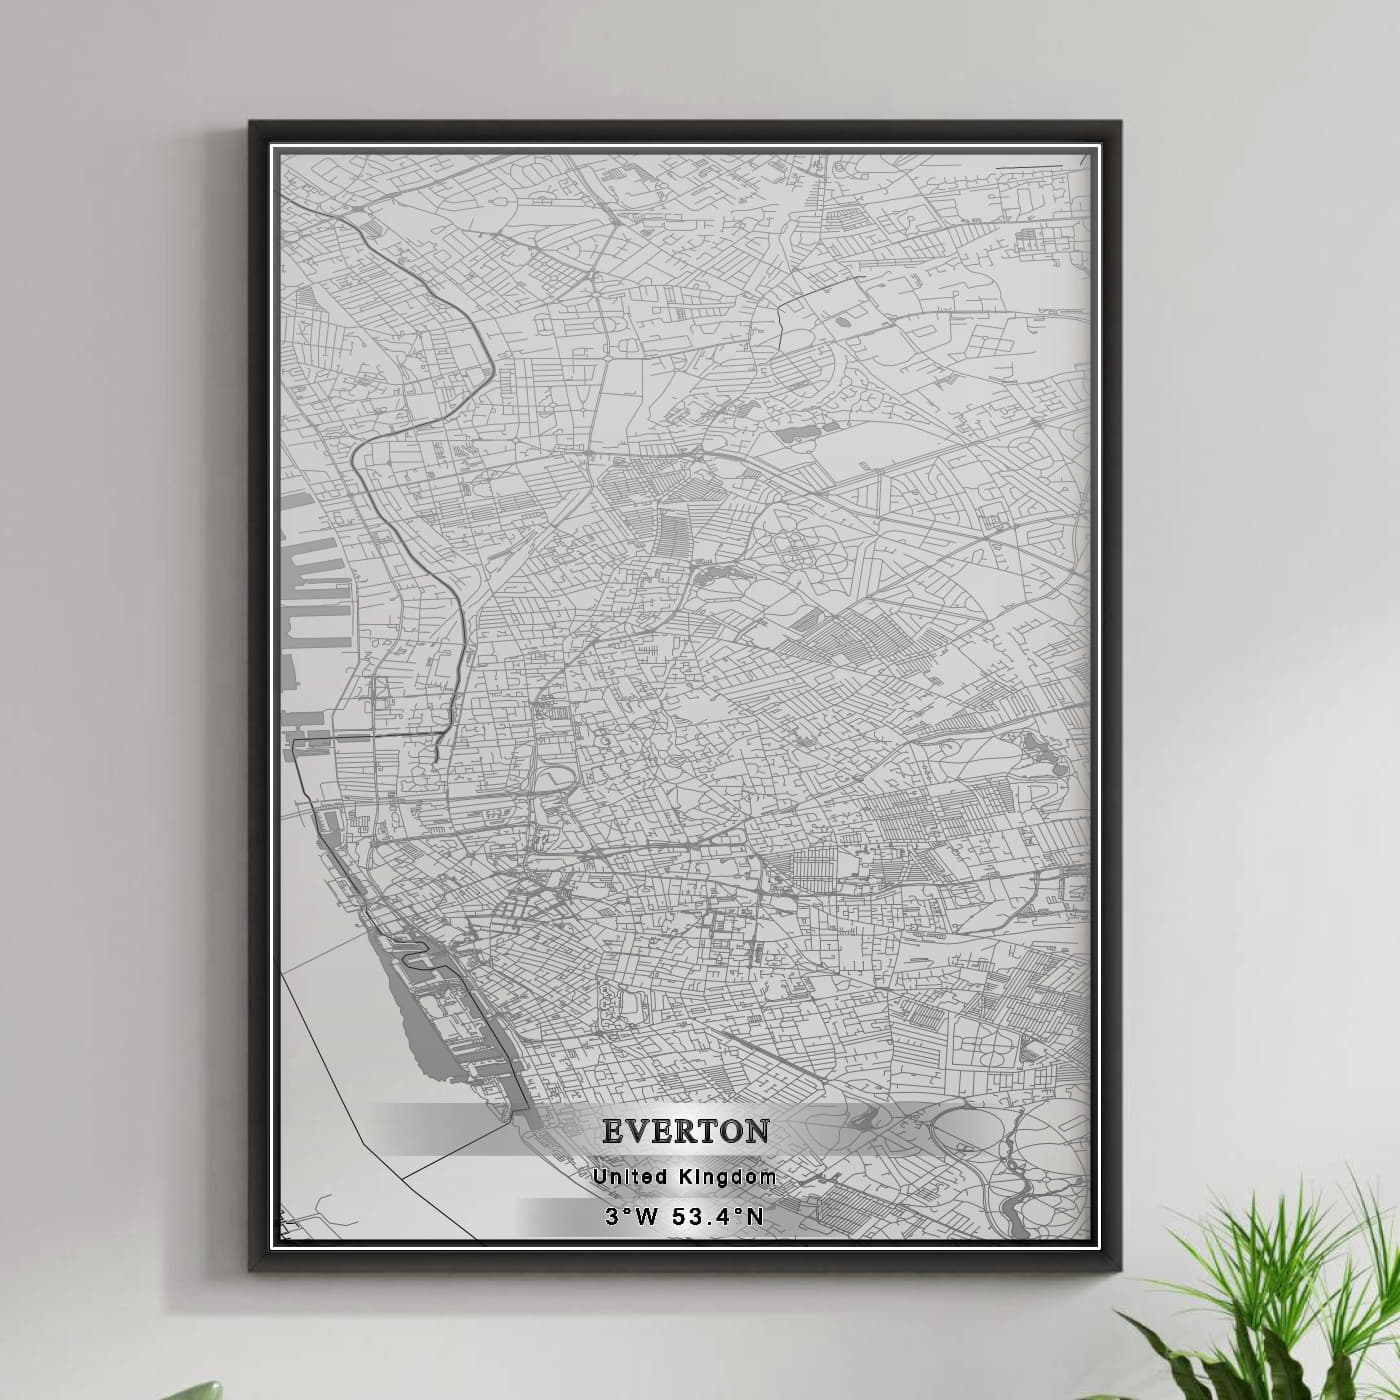 ROAD MAP OF EVERTON, UNITED KINGDOM BY MAPBAKES